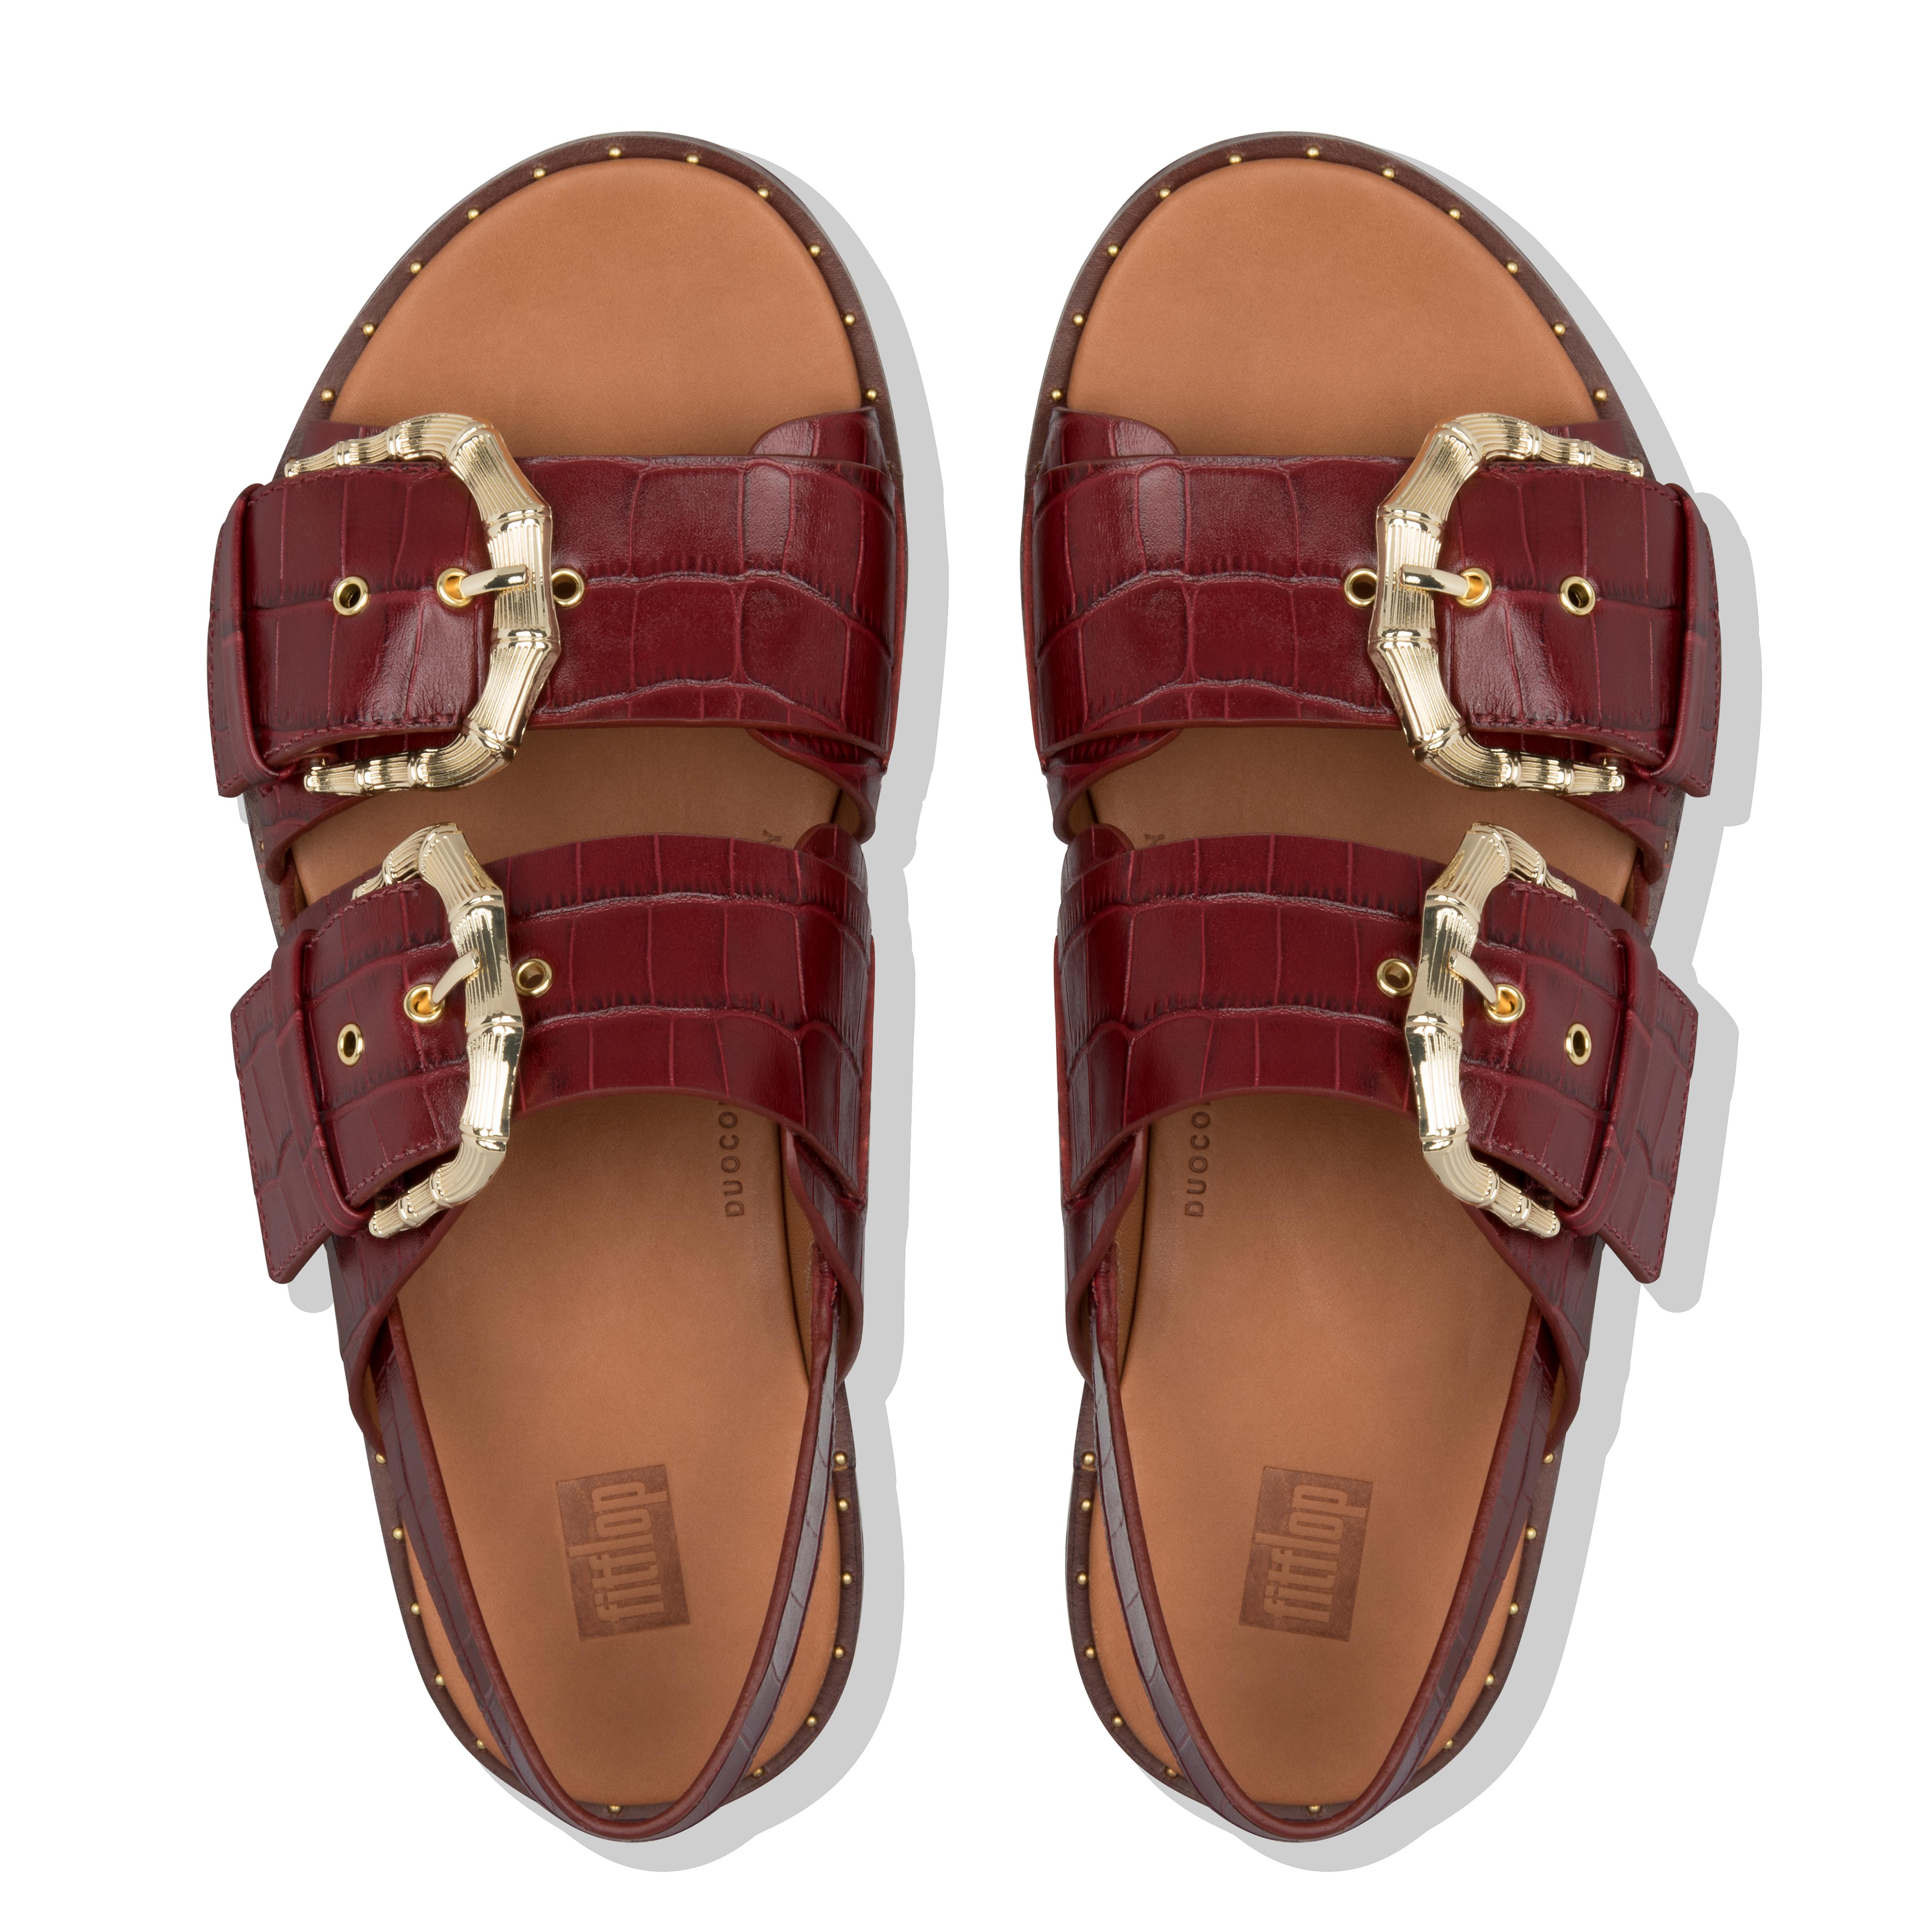 Women's Kaia Leather Back-Strap-Sandals 